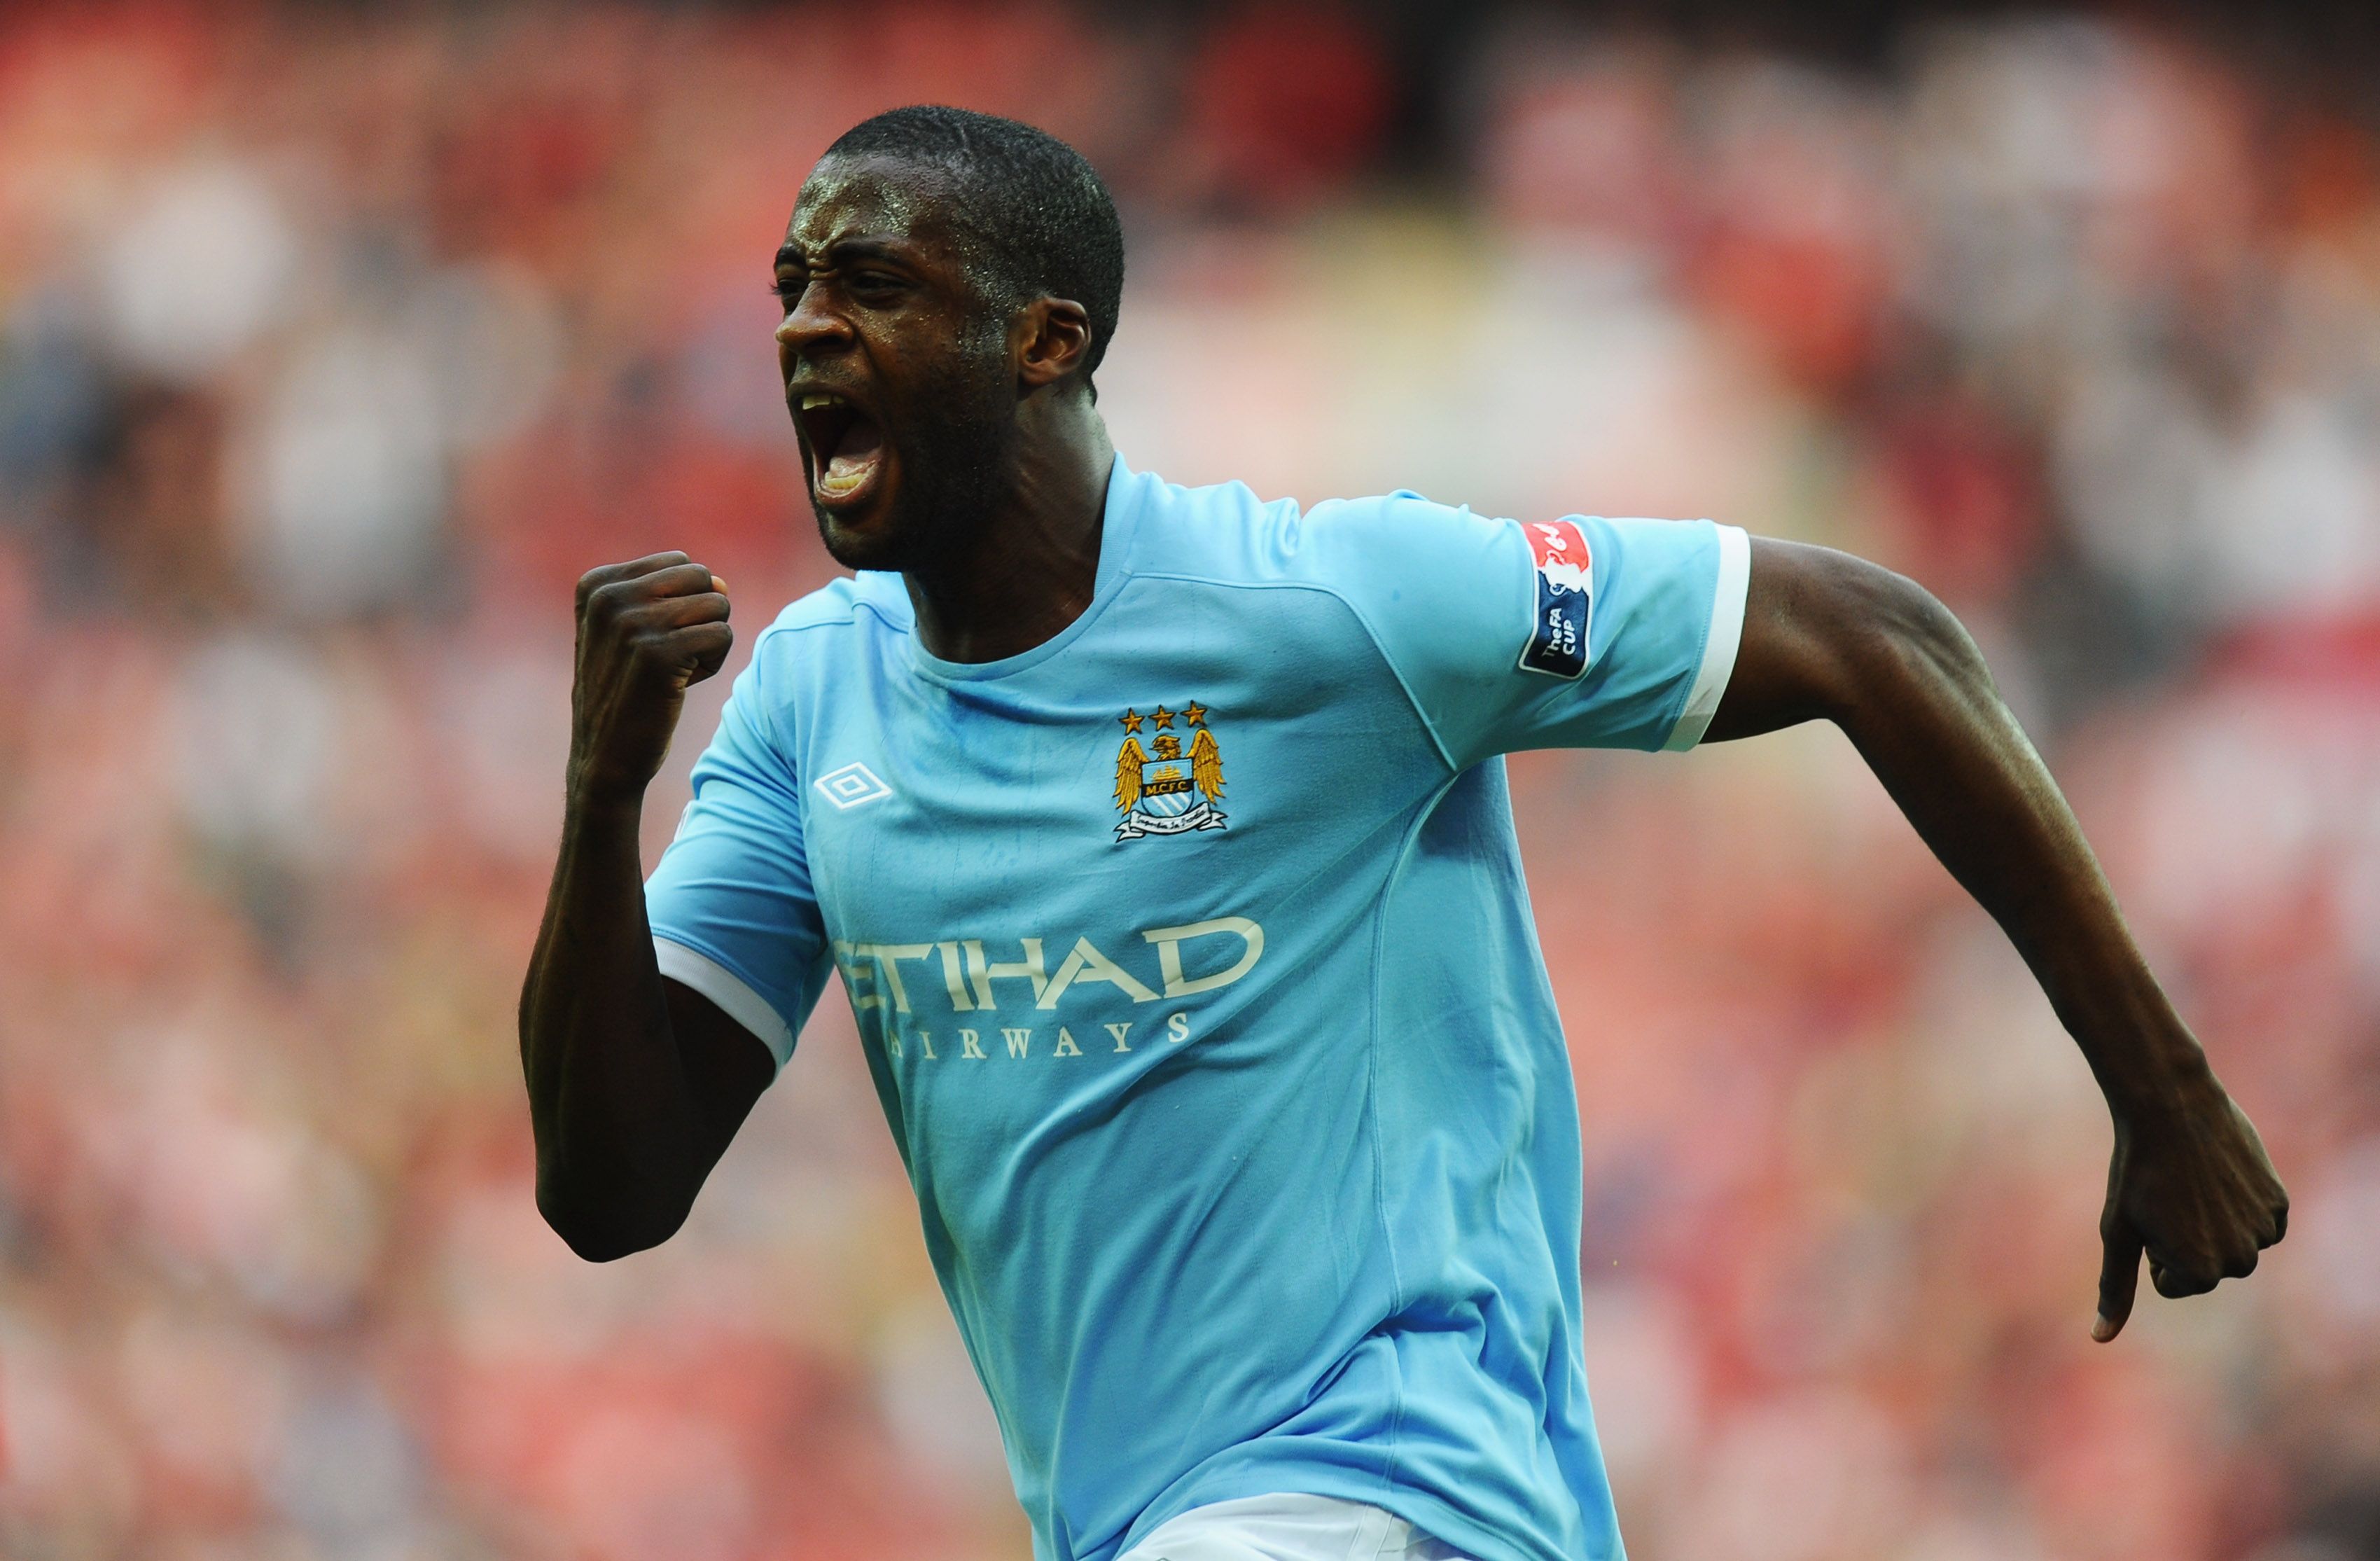 Yaya Toure of Manchester City celebrates scoring the opening goal during the FA Cup